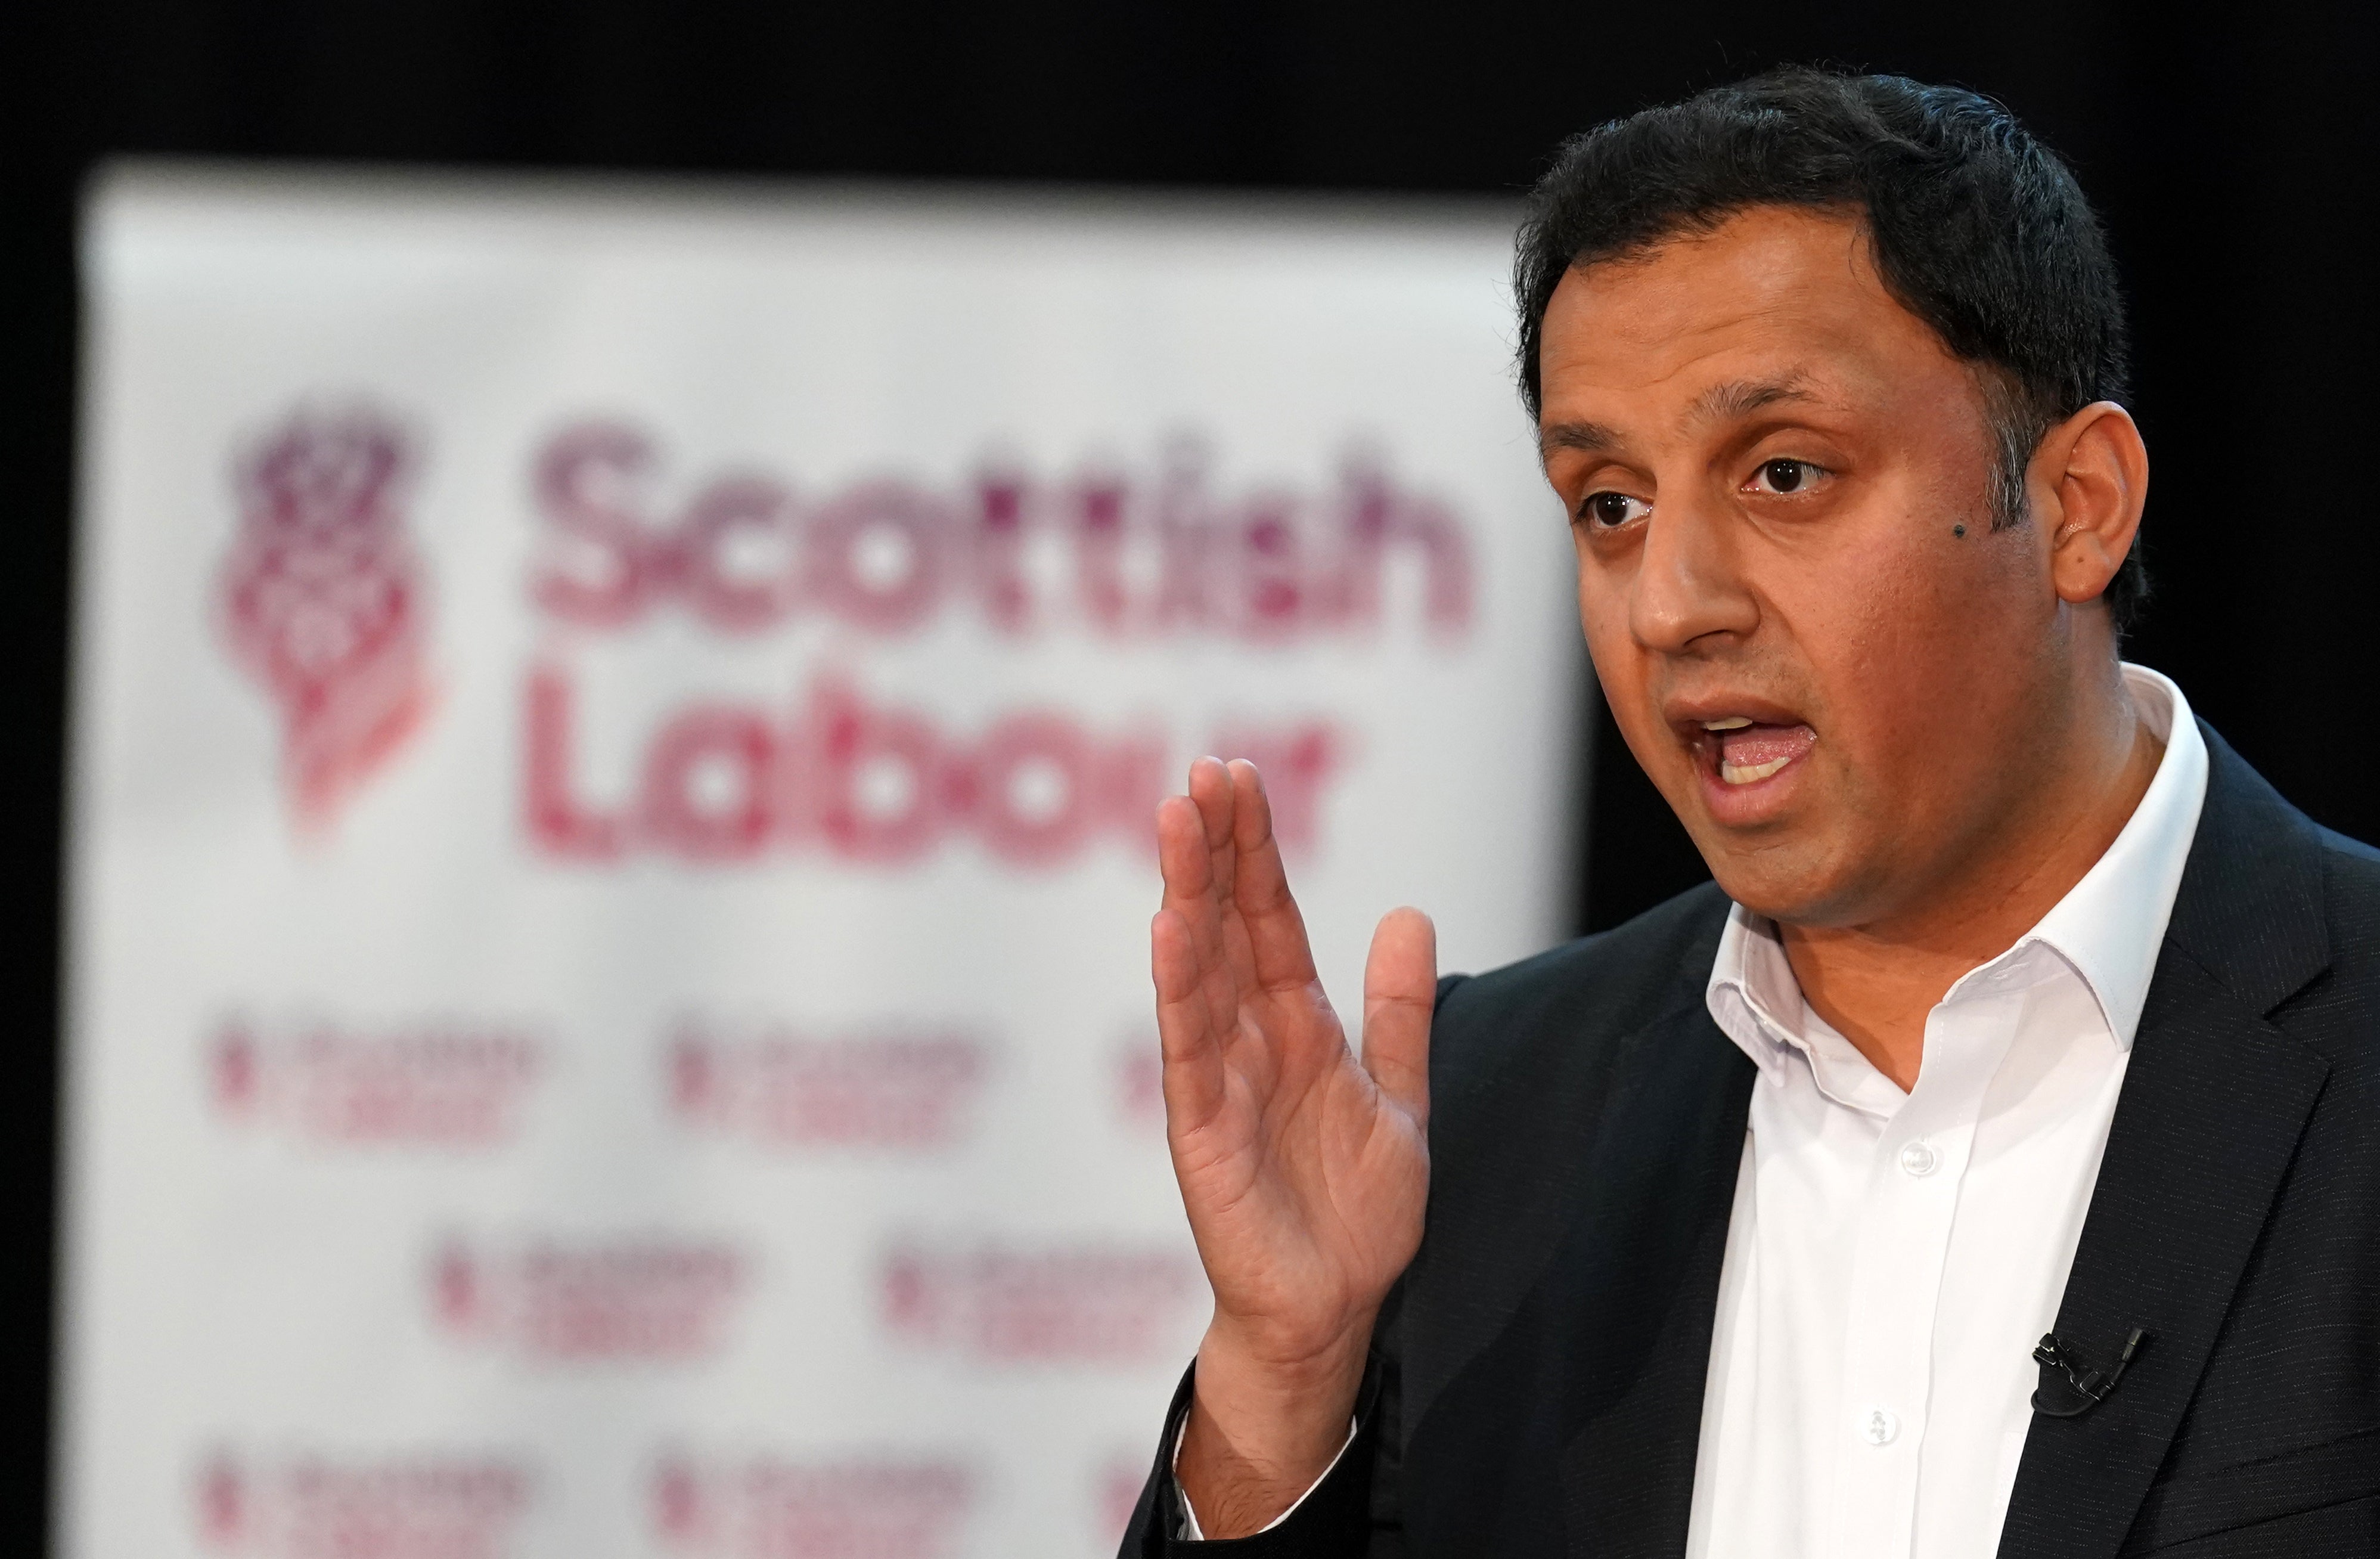 Scottish Labour leader Anas Sarwar joined strikers at Edinburgh Waverley despite UK frontbenchers being ordered not to do so (Andrew Milligan/PA)